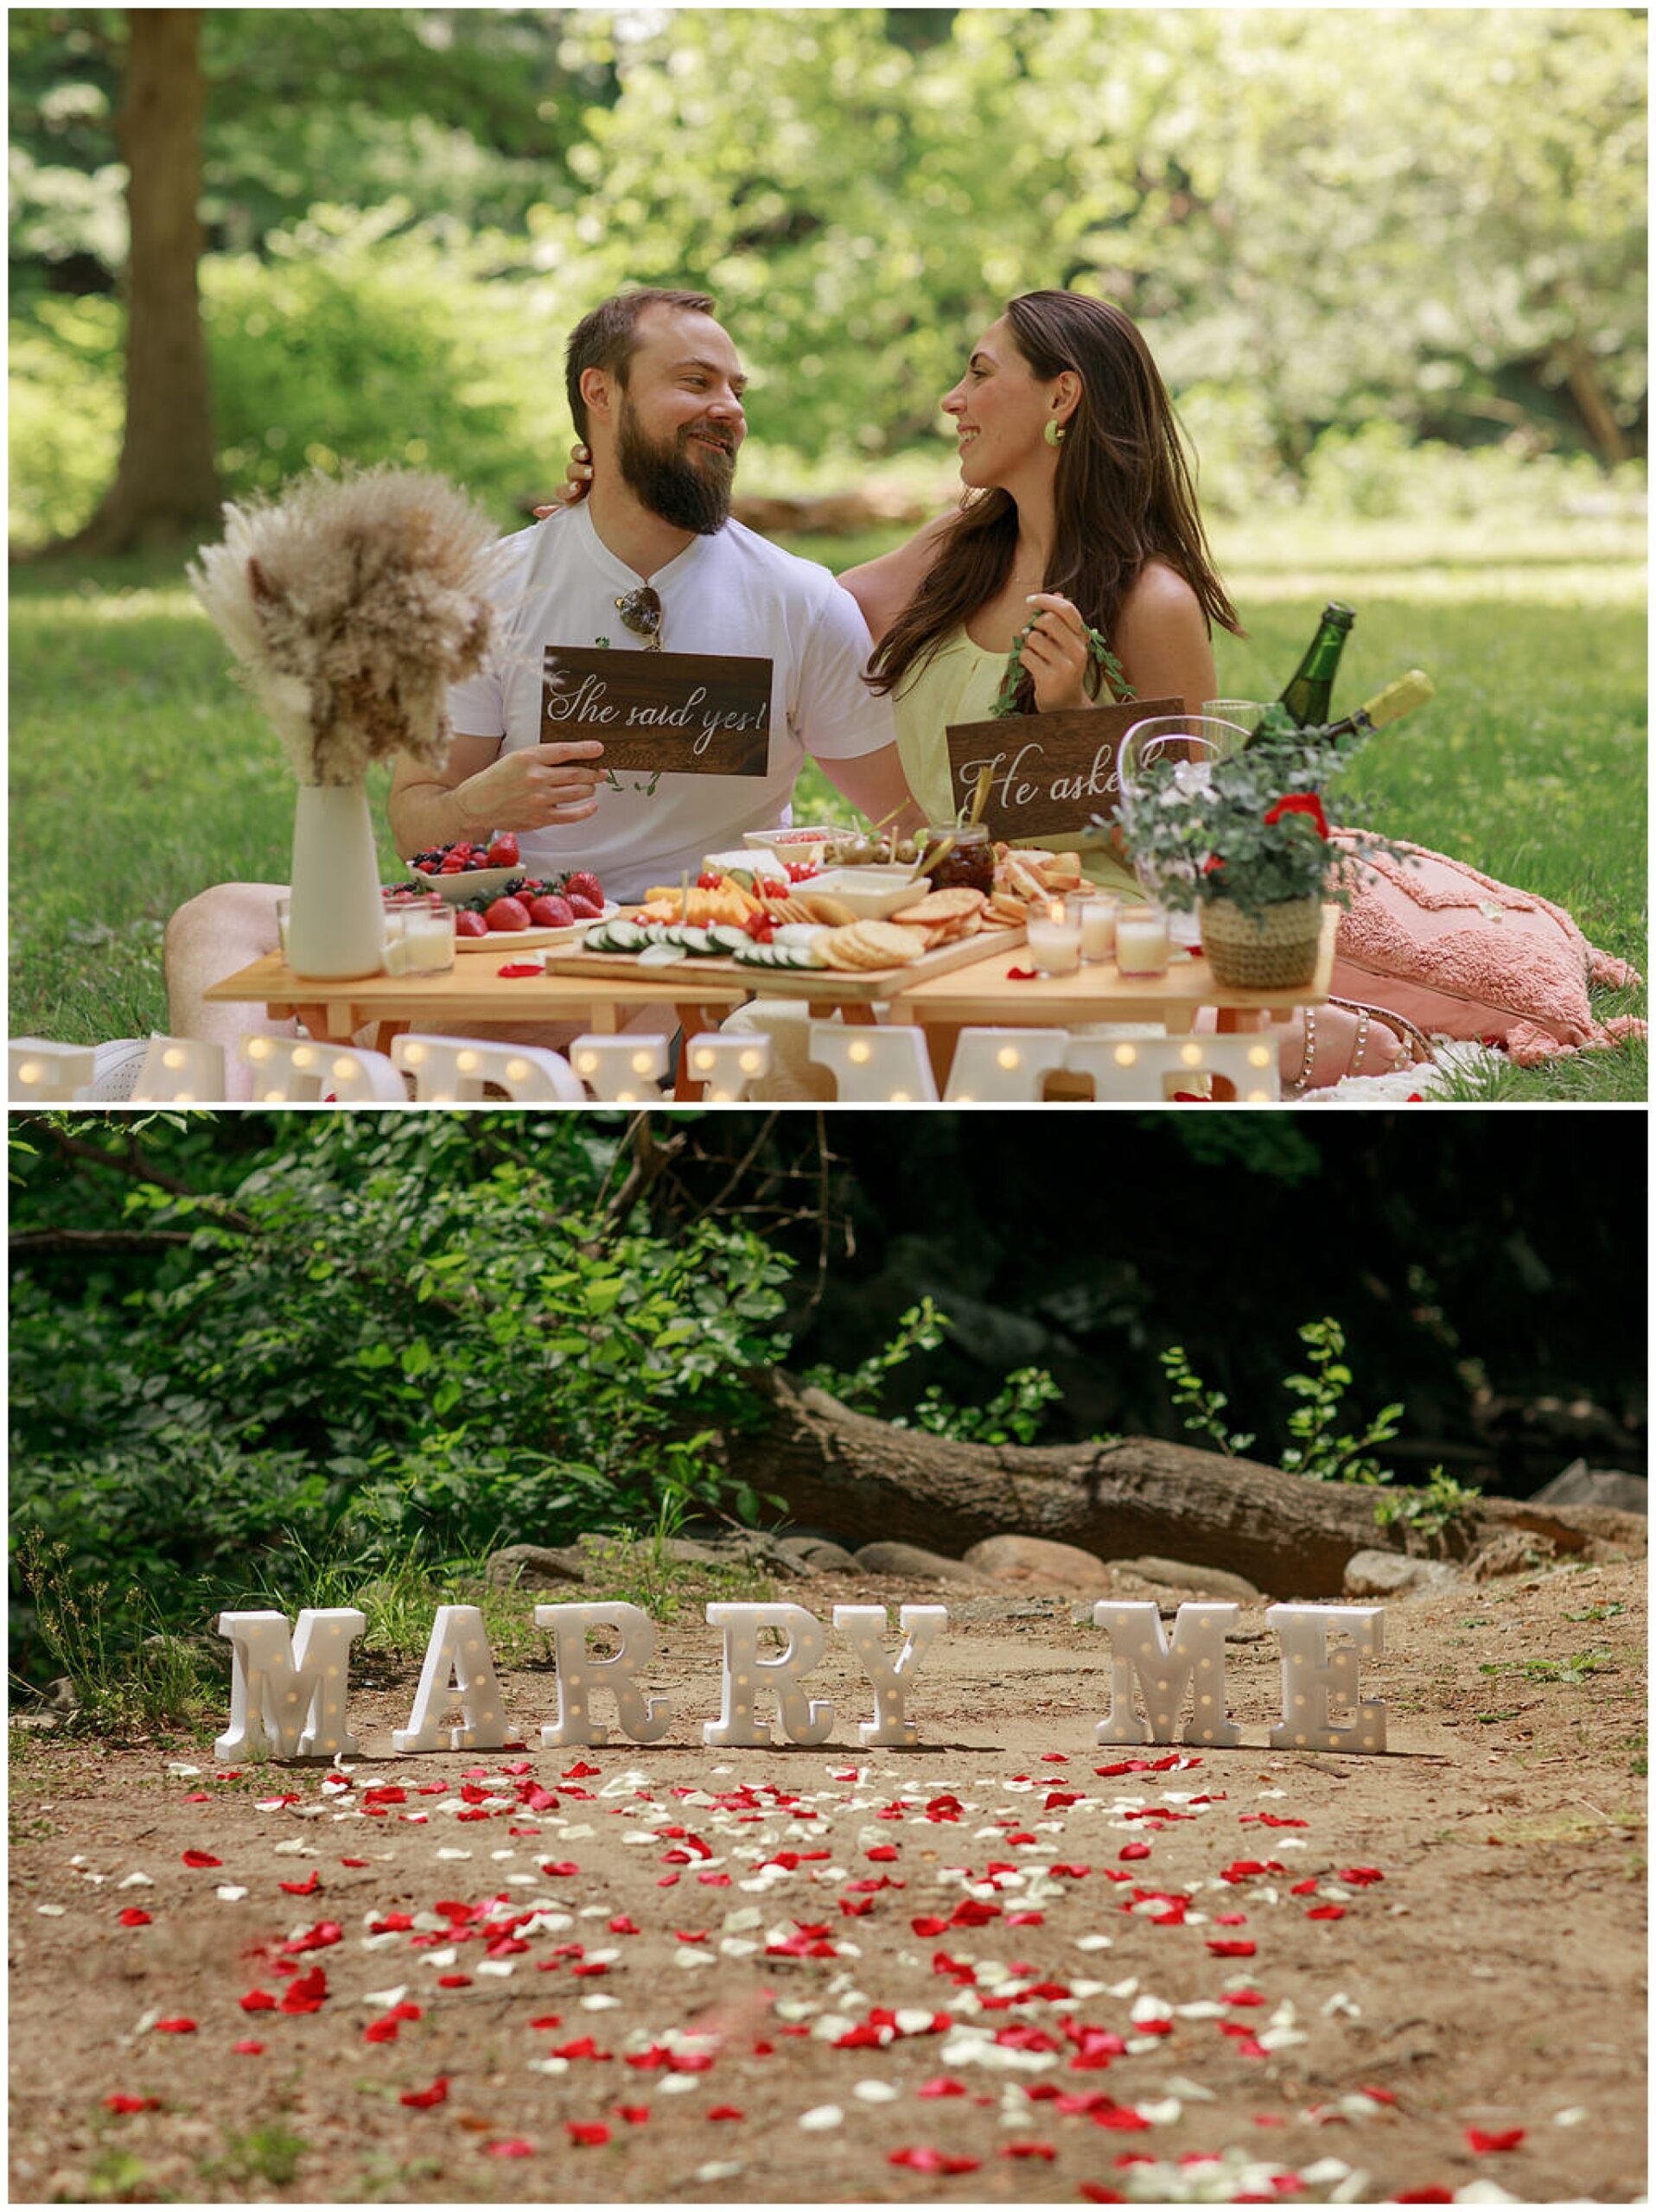 A newly engaged couple holds signs while sitting at a proposal site set with a picnic and rose petals